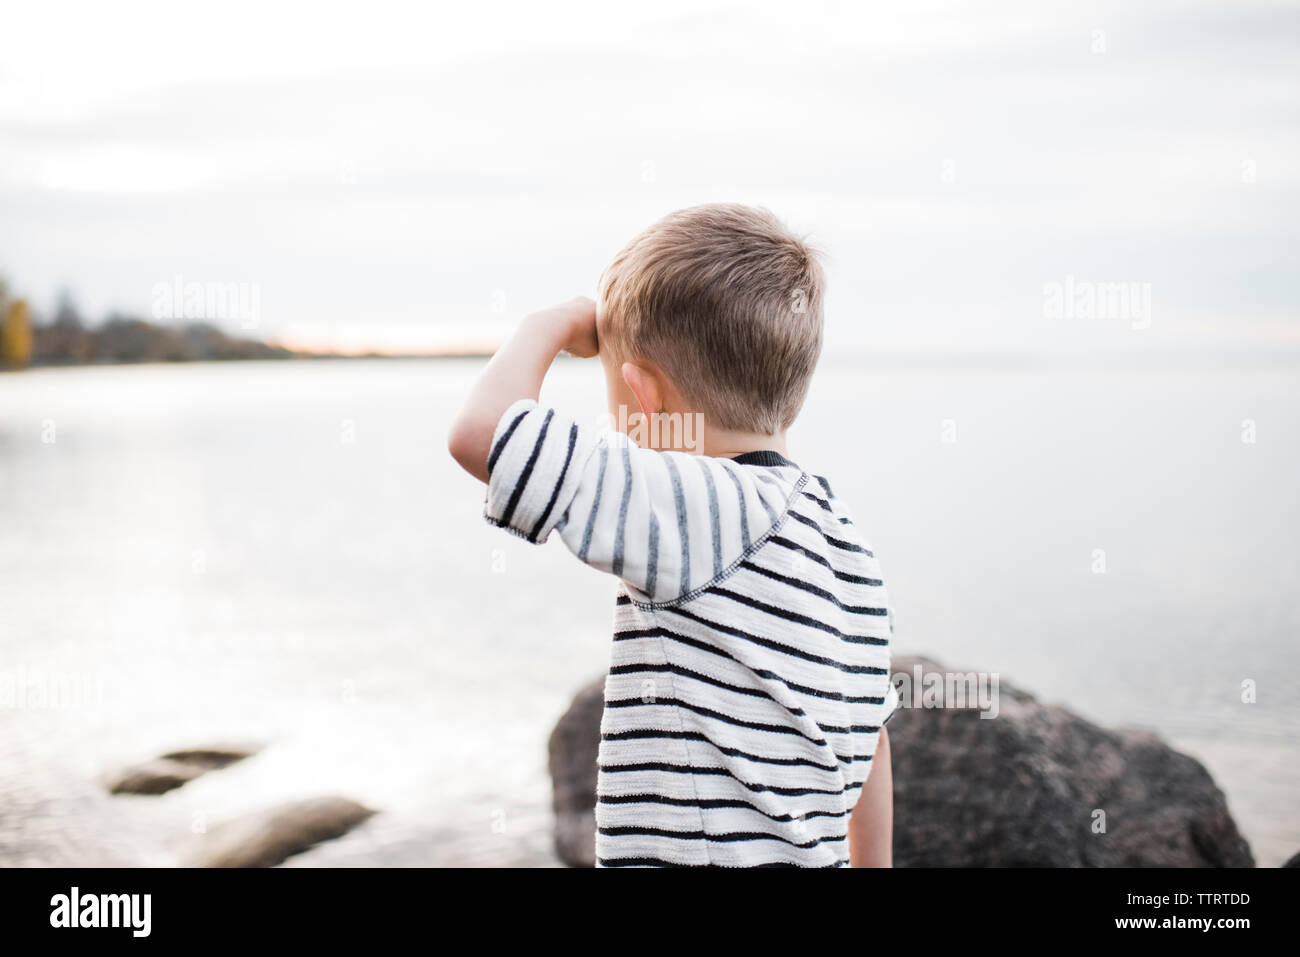 Side view of boy standing by Lake Simcoe against cloudy sky Stock Photo